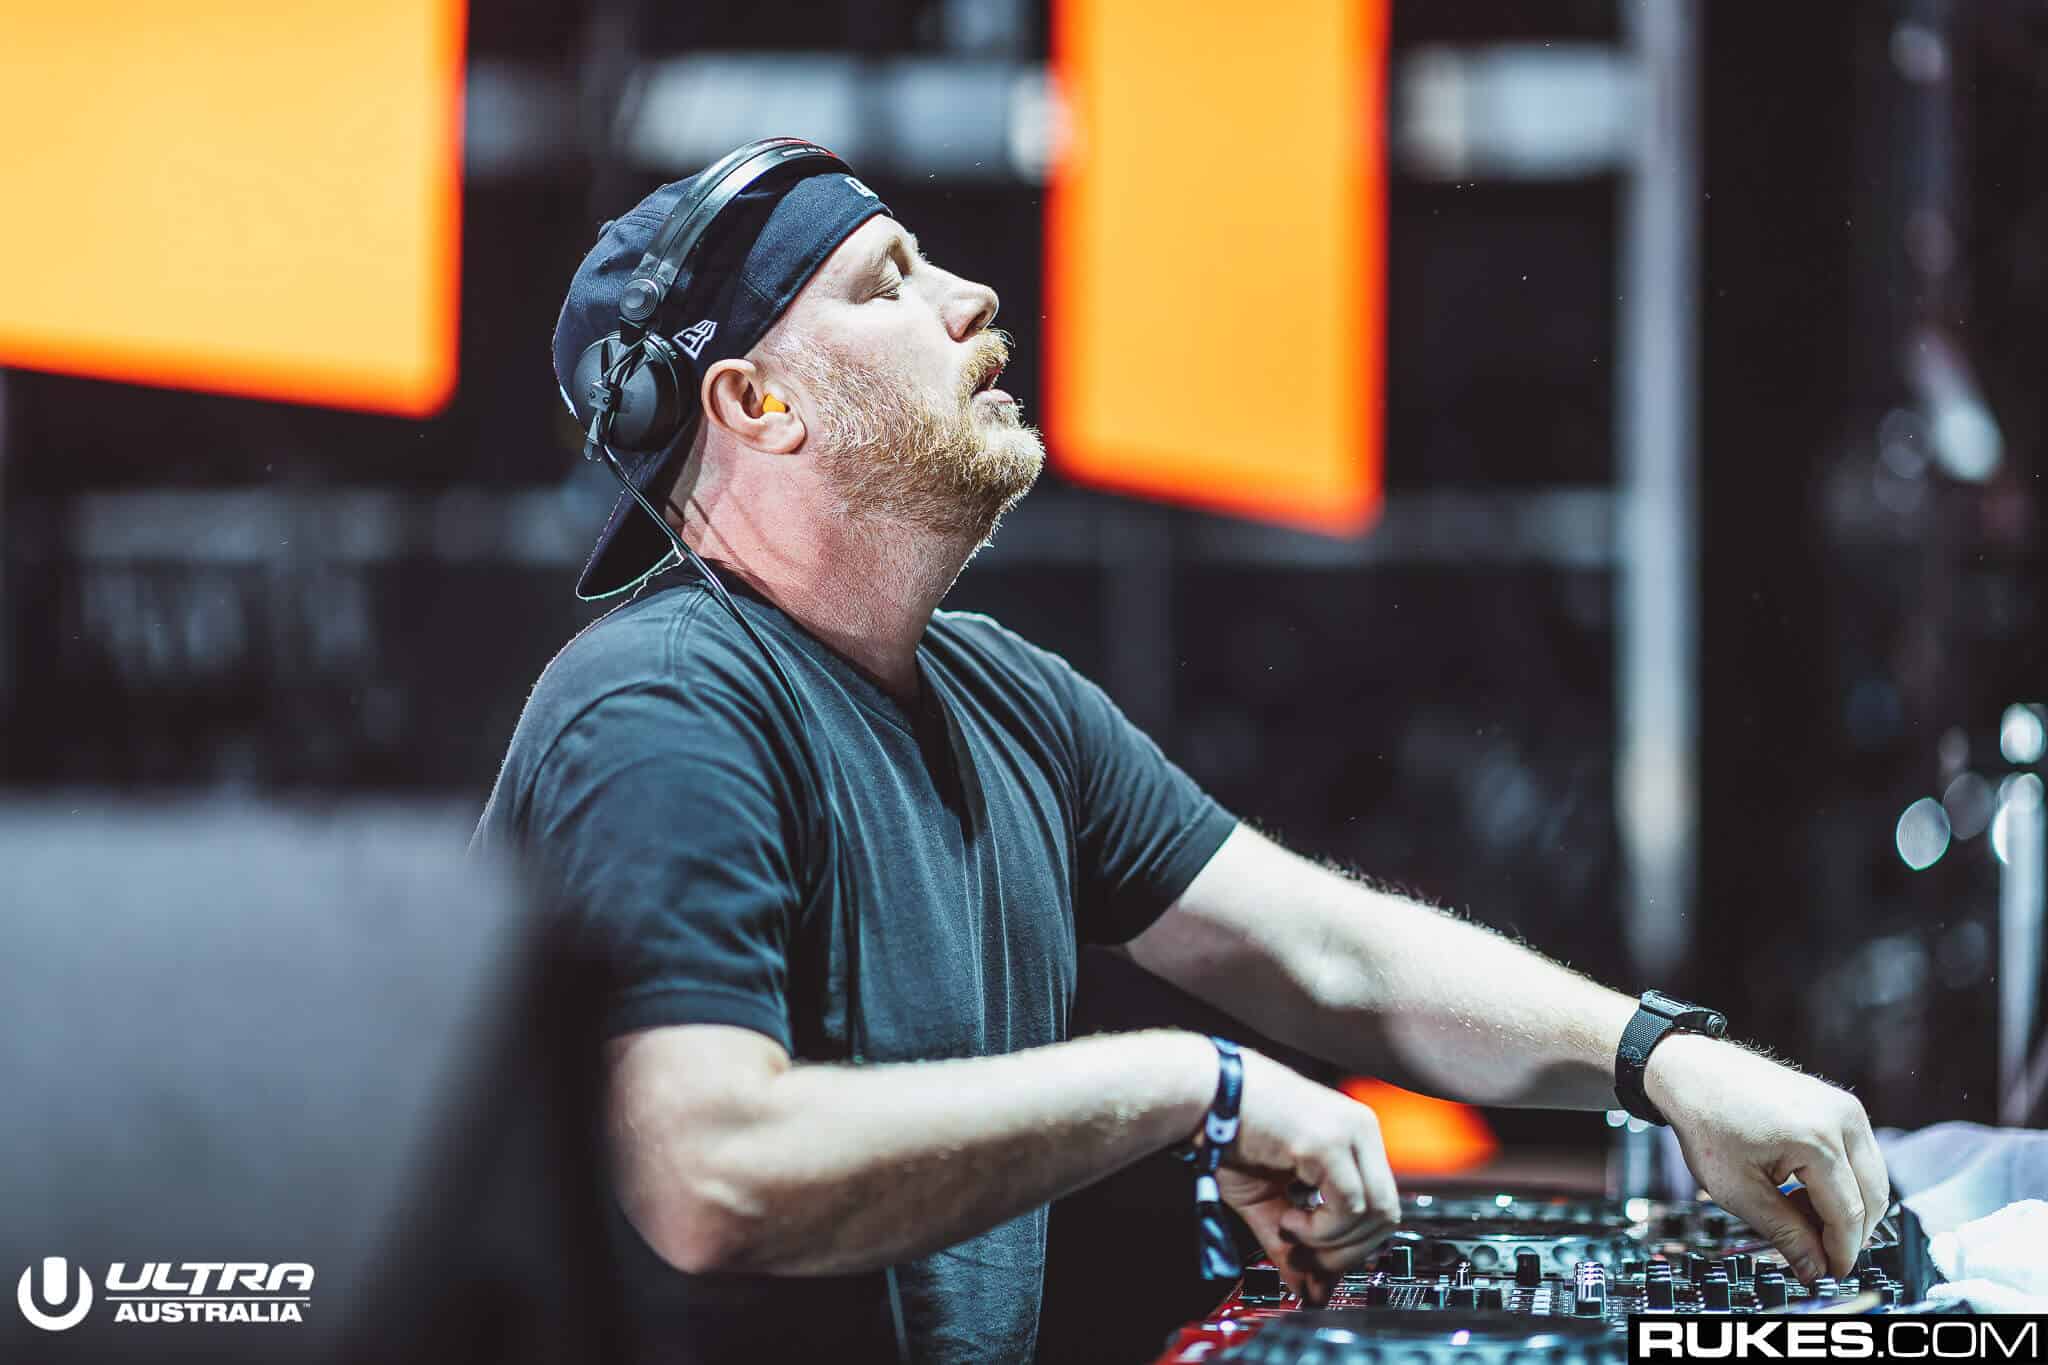 Eric Prydz presents 'The Return' of Pryda with the first release in five years: Listen